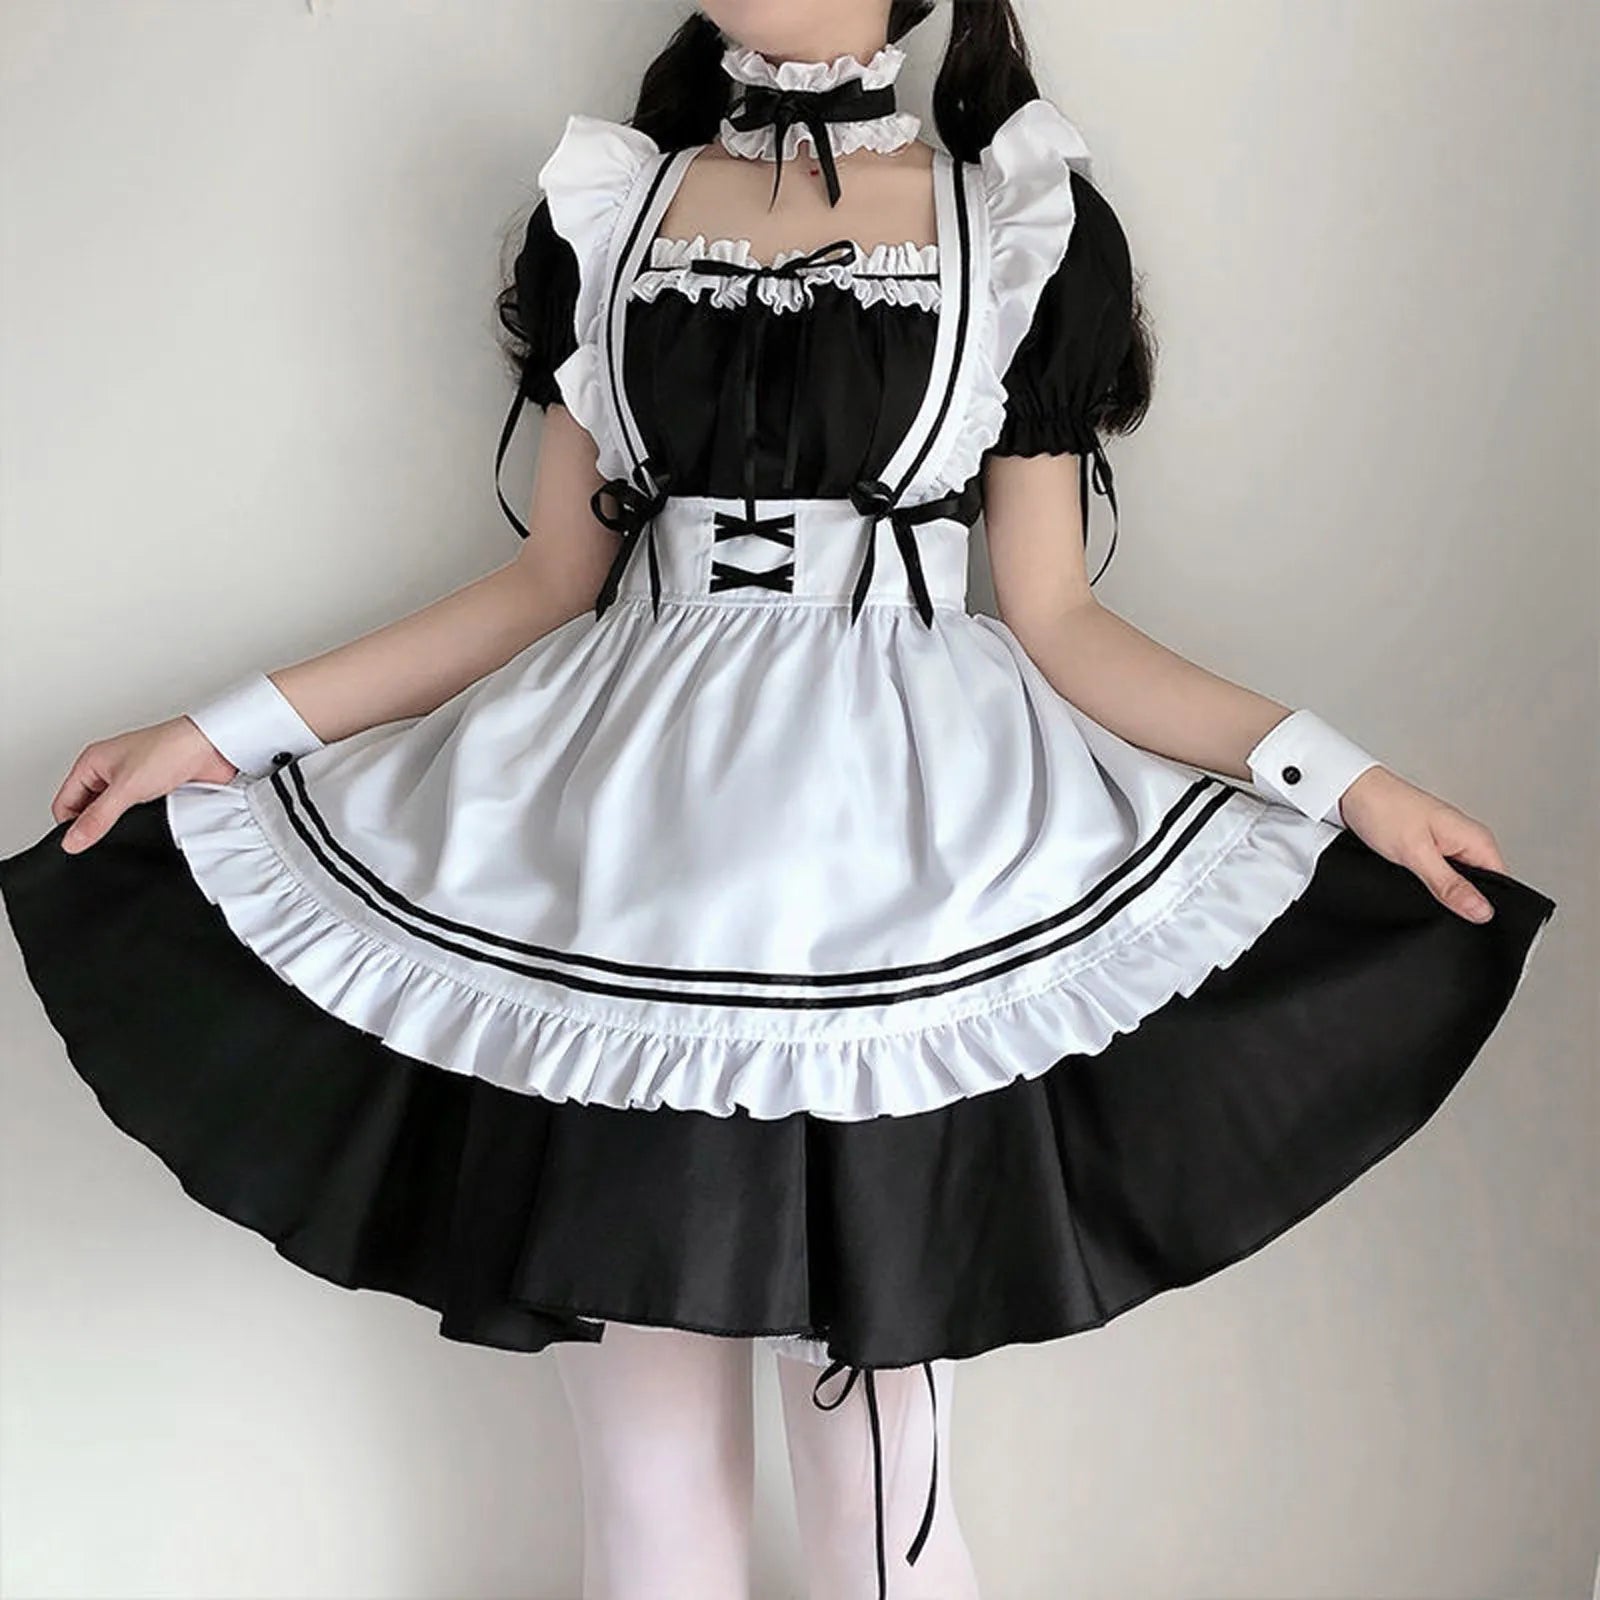 Black Cute Lolita Maid Costume: Lovely Cosplay Outfit - Black / S - All Dresses - Costumes - 7 - 2024